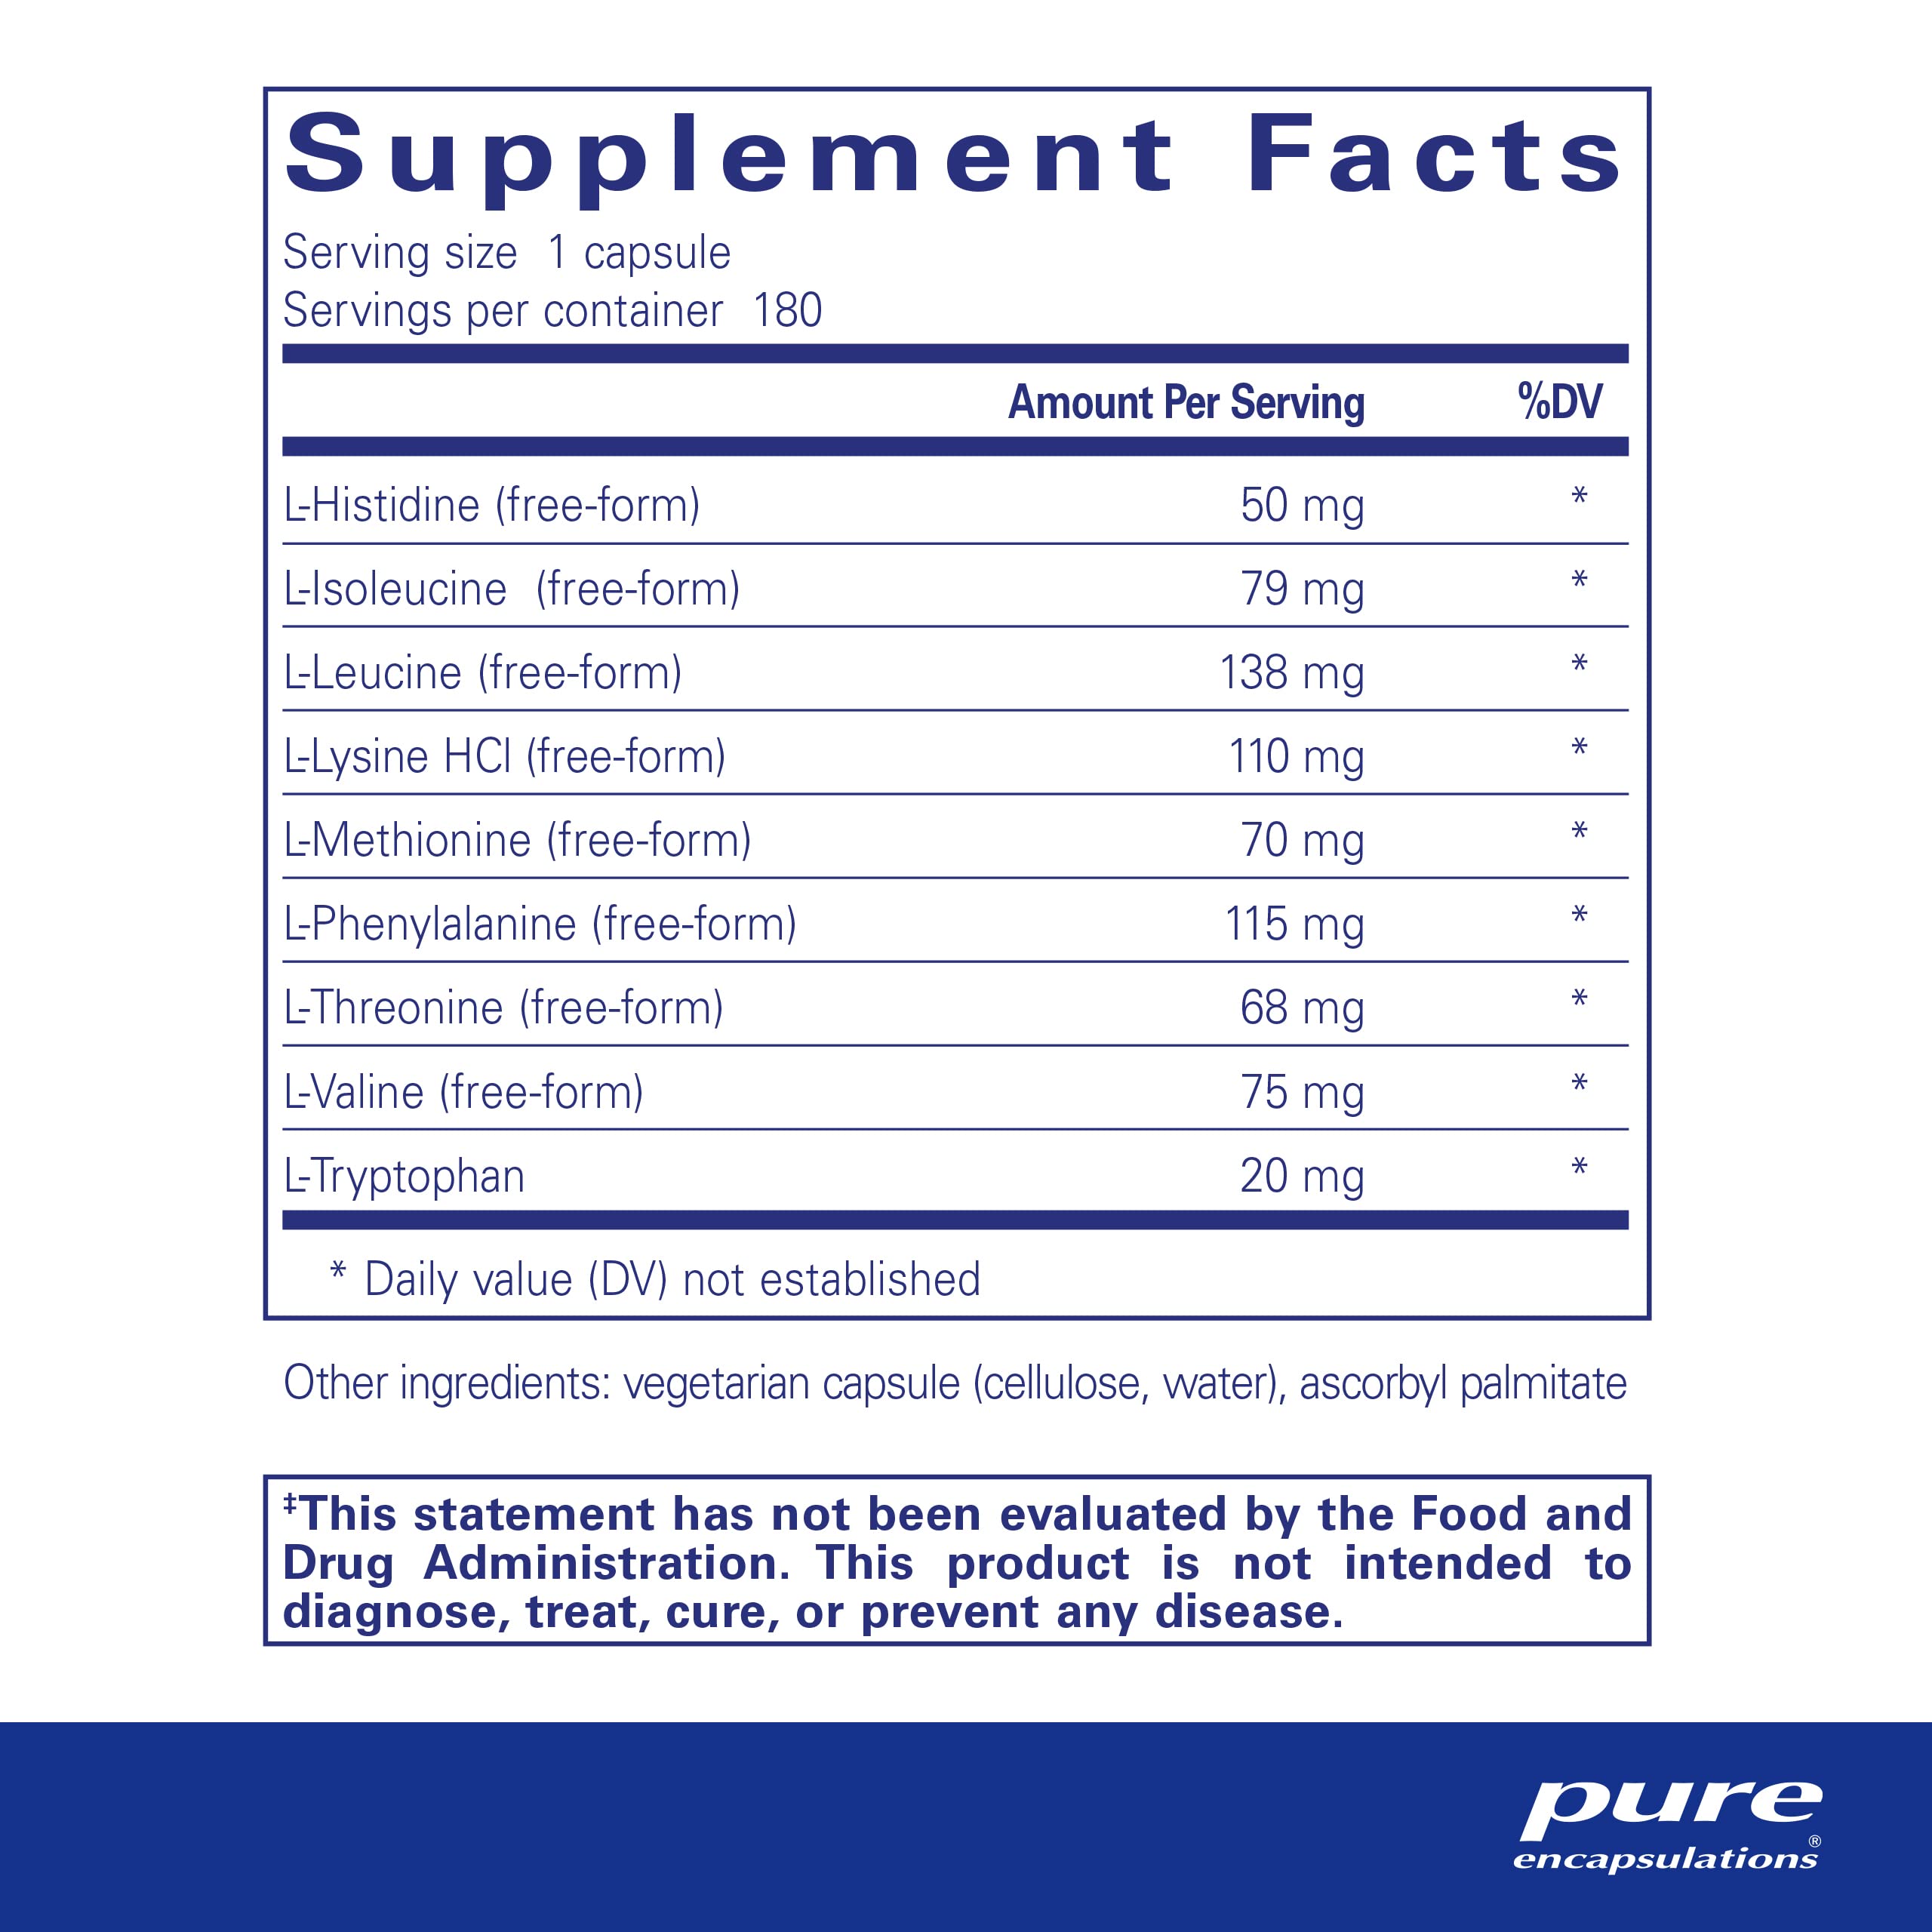 Pure Encapsulations Essential Aminos | Amino Acid Supplement for The Brain and Muscle Recovery* | 180 Capsules